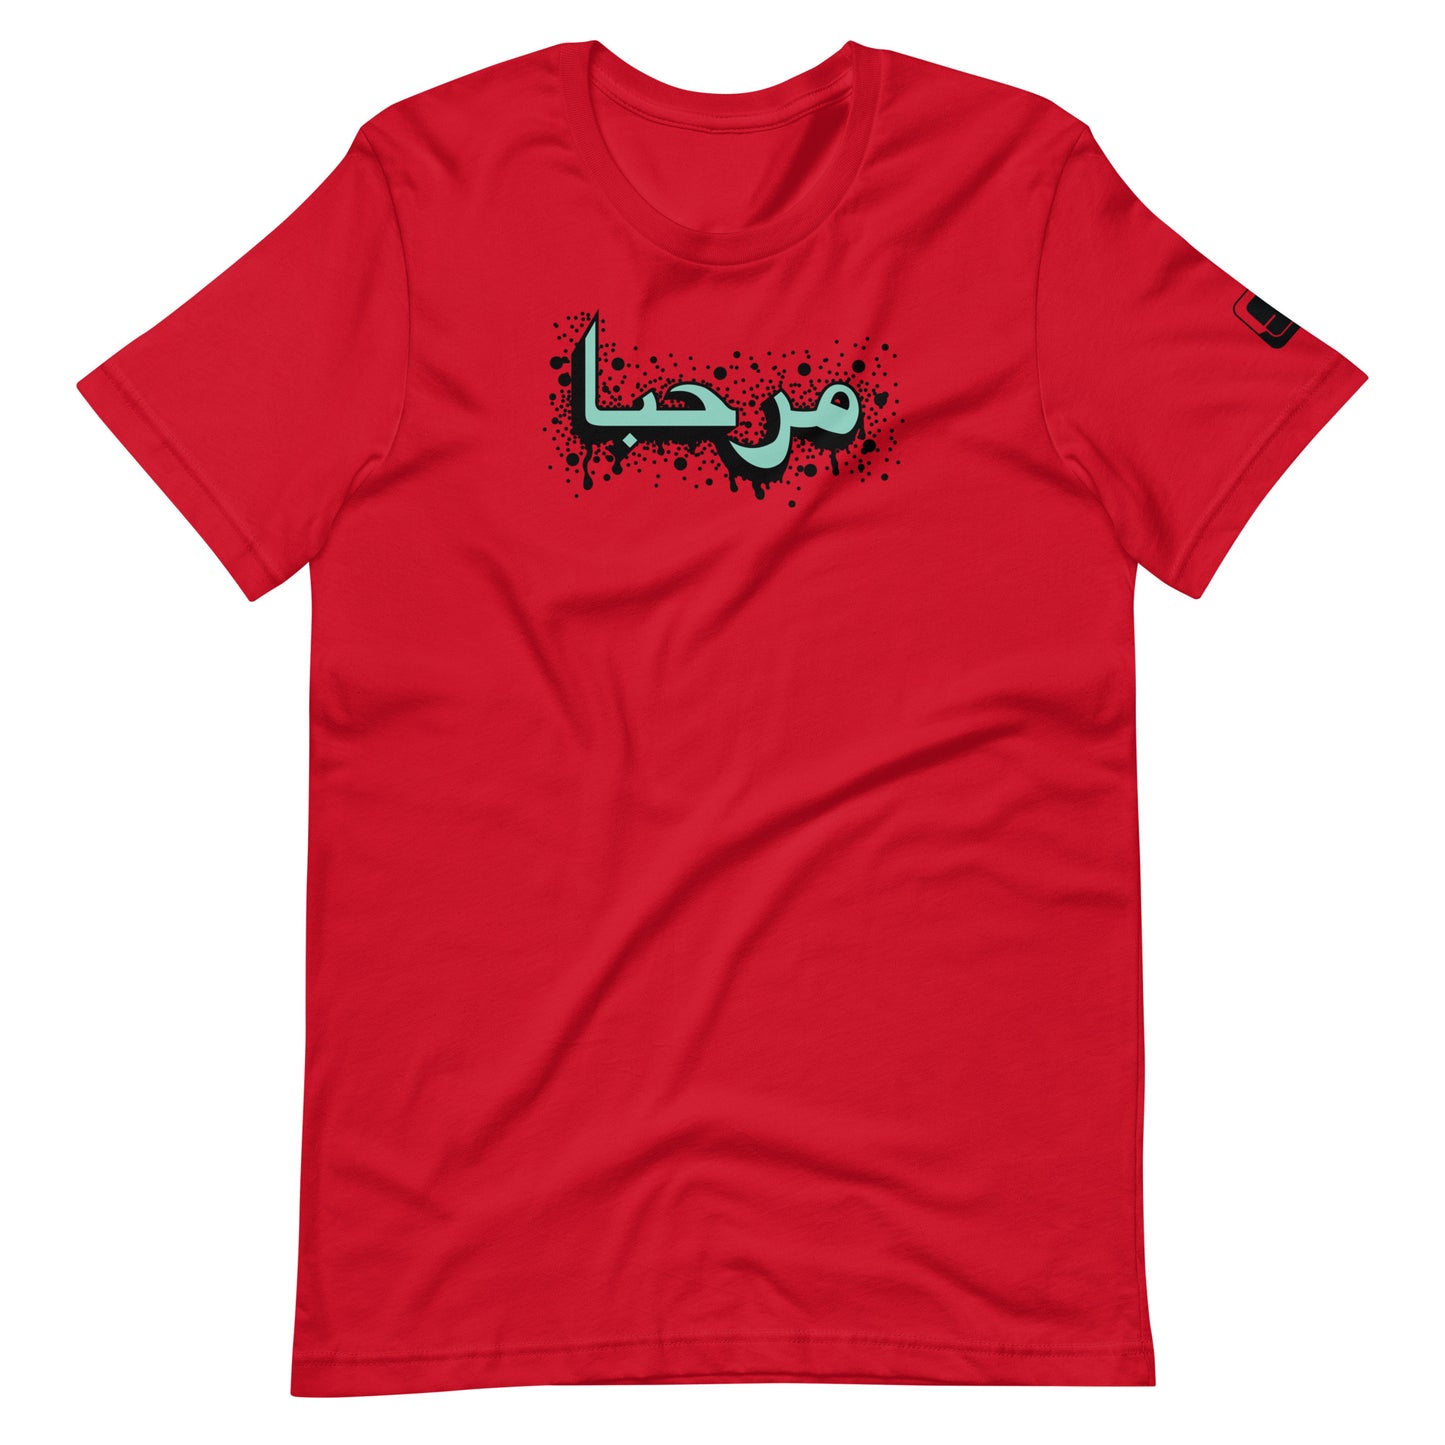 Red t-shirt featuring central turquoise Arabic calligraphy with black shadow and scattered ink dots, accompanied by a small black logo patch on the sleeve, displayed against a white background.